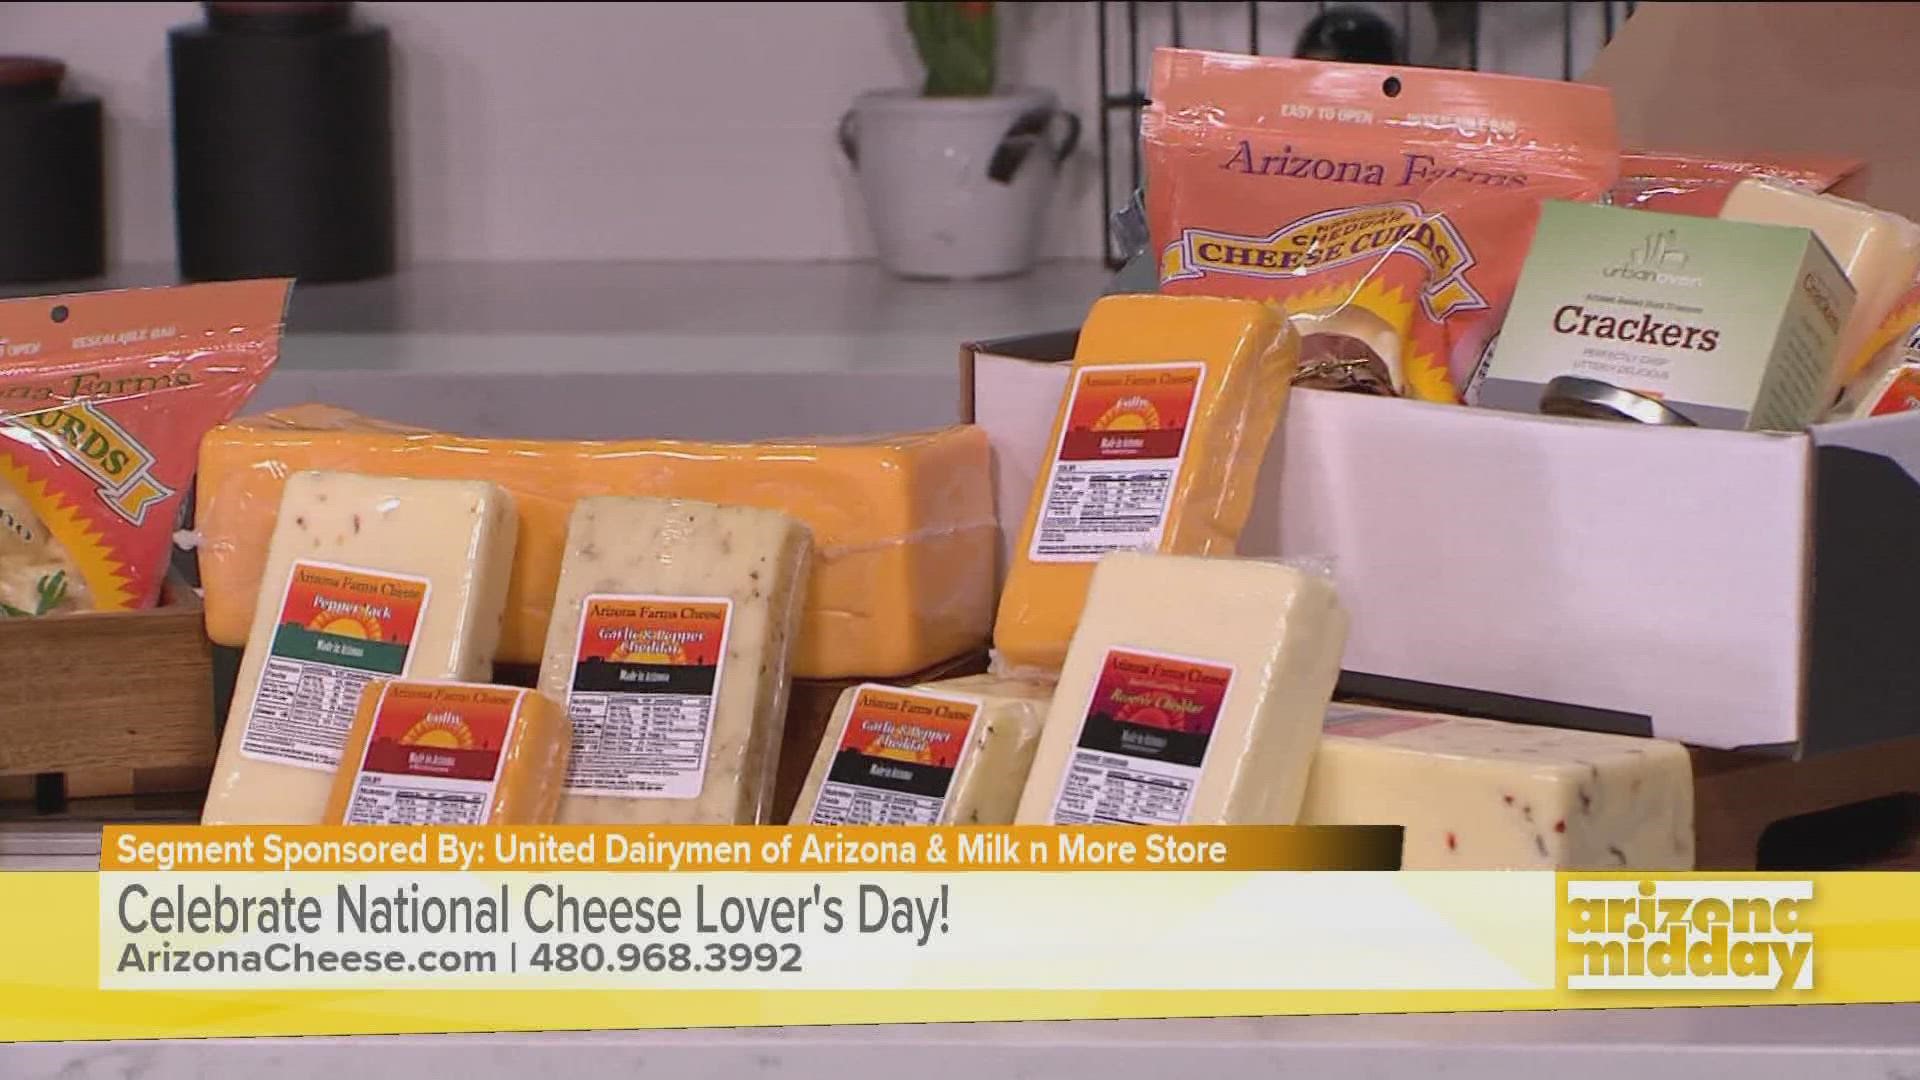 Saul Lopez with United Dairy Men of Arizona shares the tools and tips on how to make some cheese at home and where to buy local cheese.